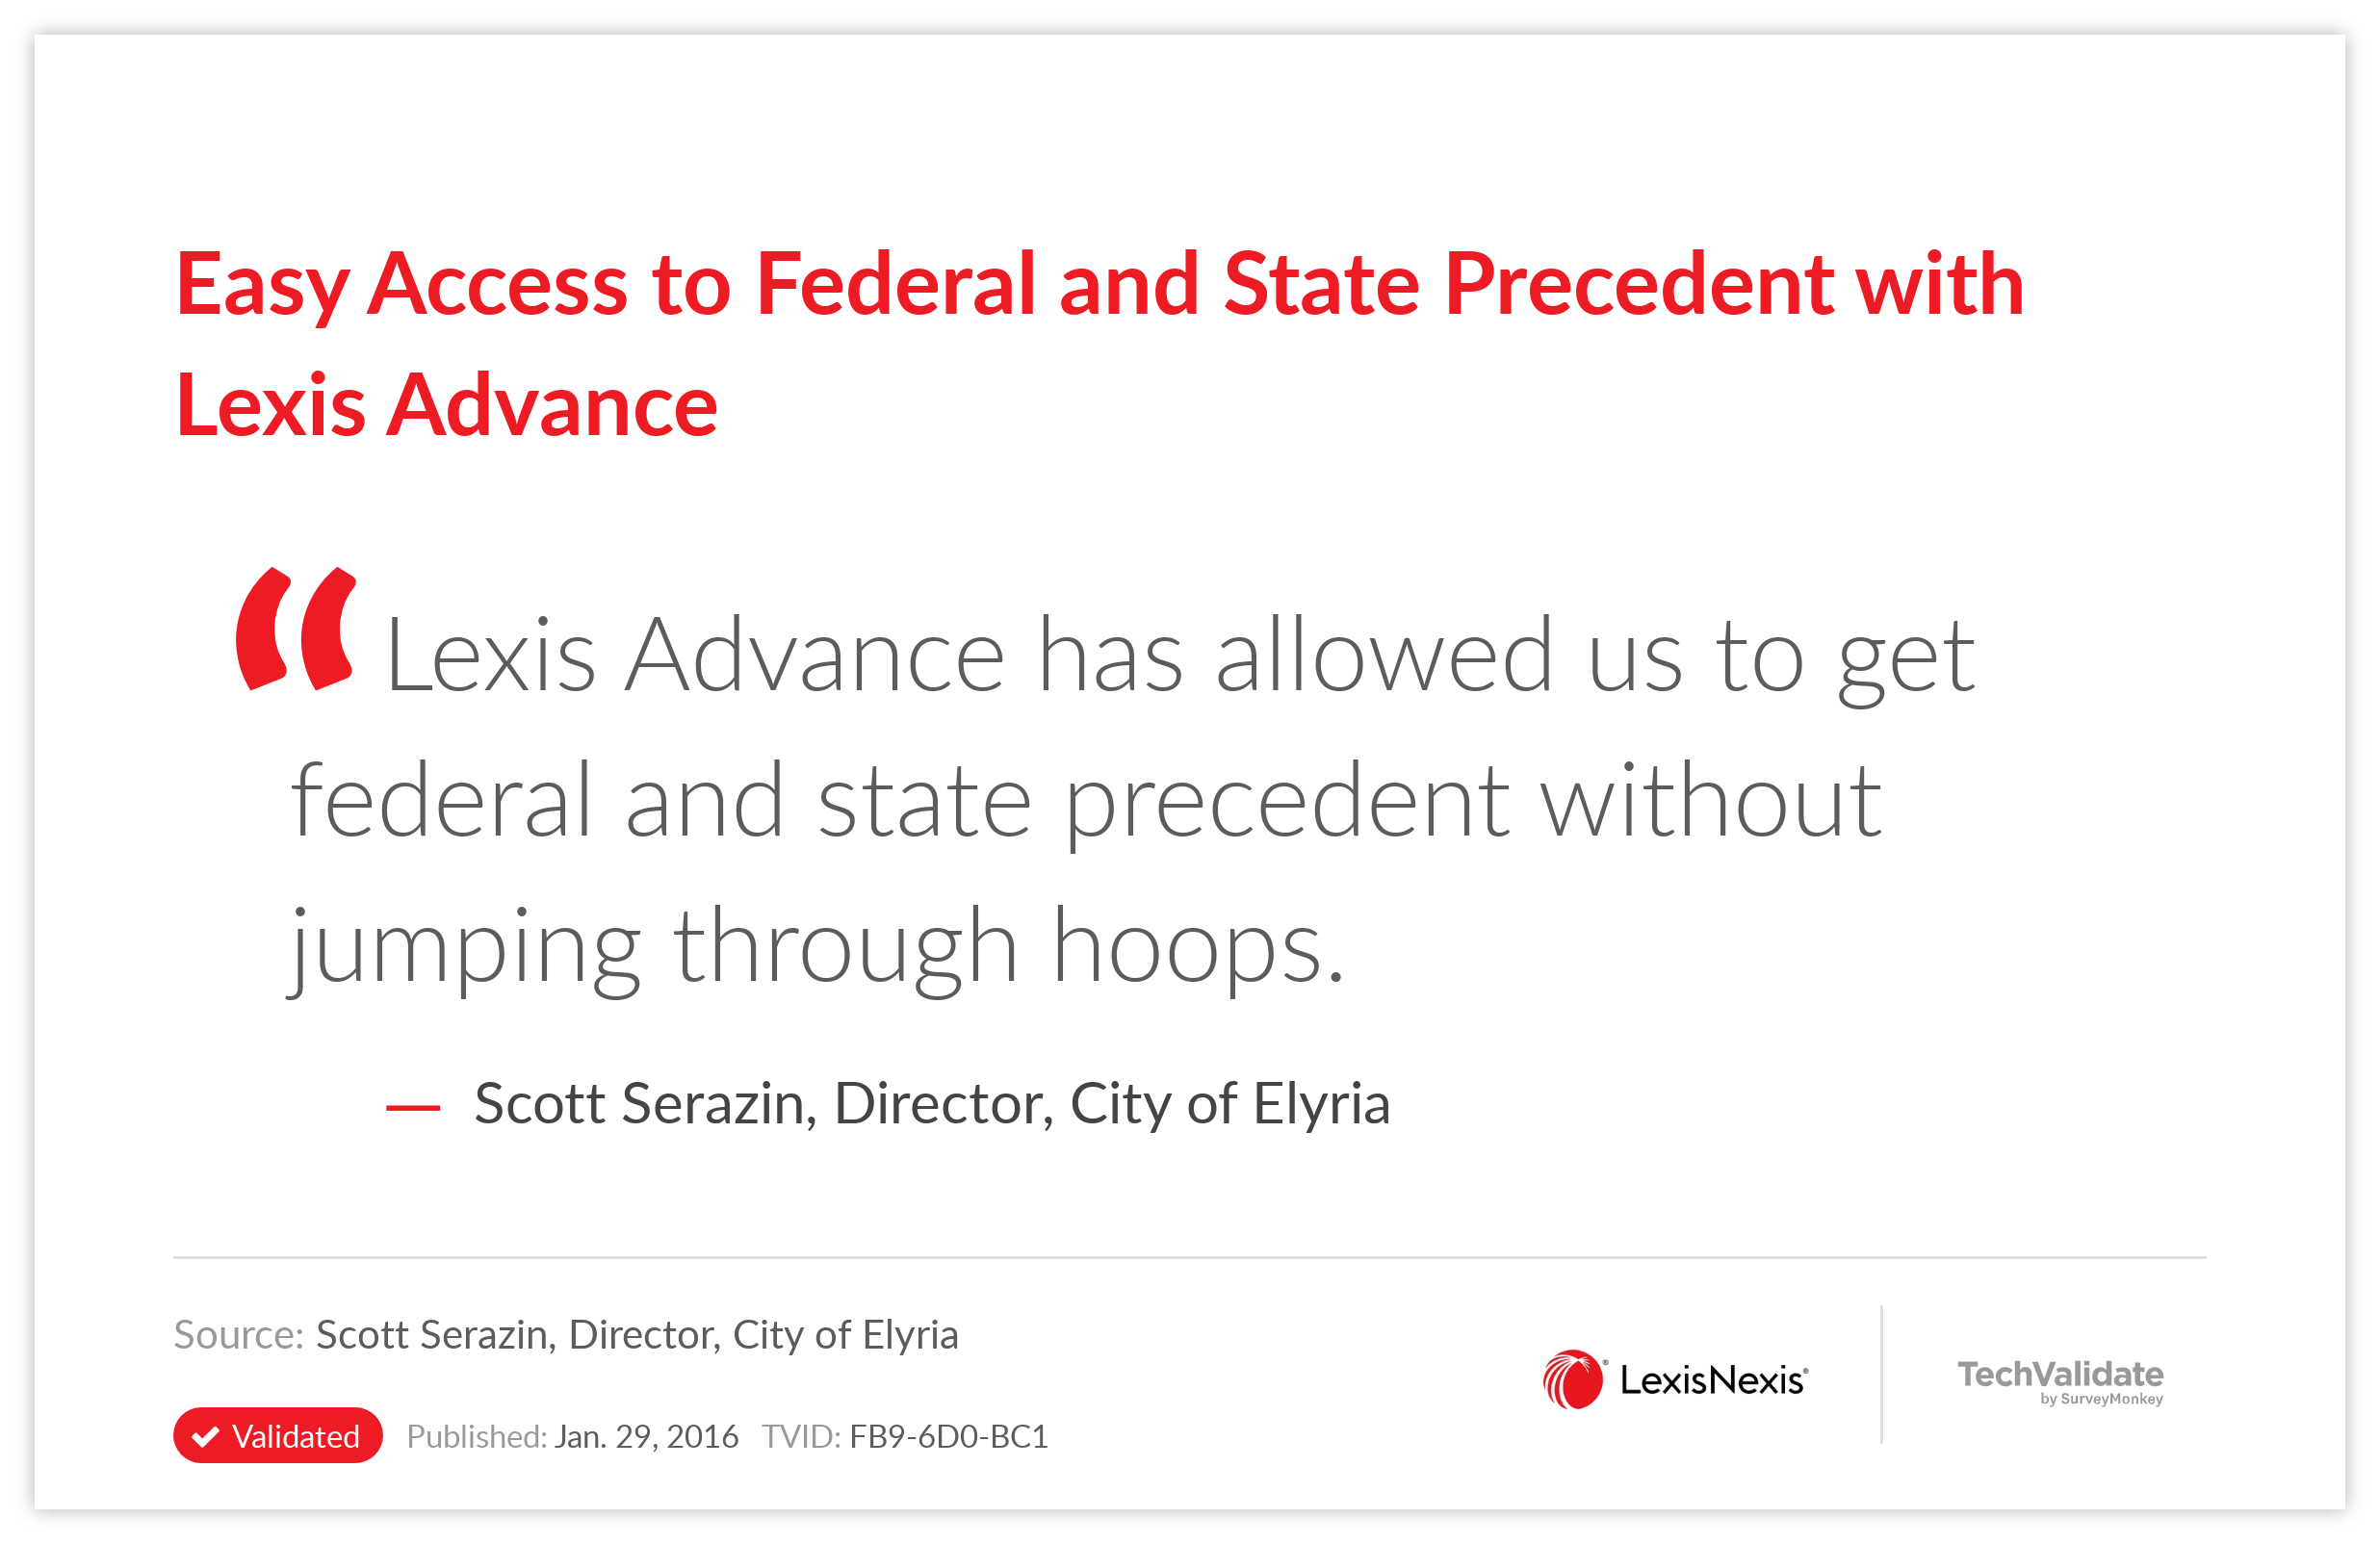 Easy Access to Federal and State Precedent with Lexis Advance